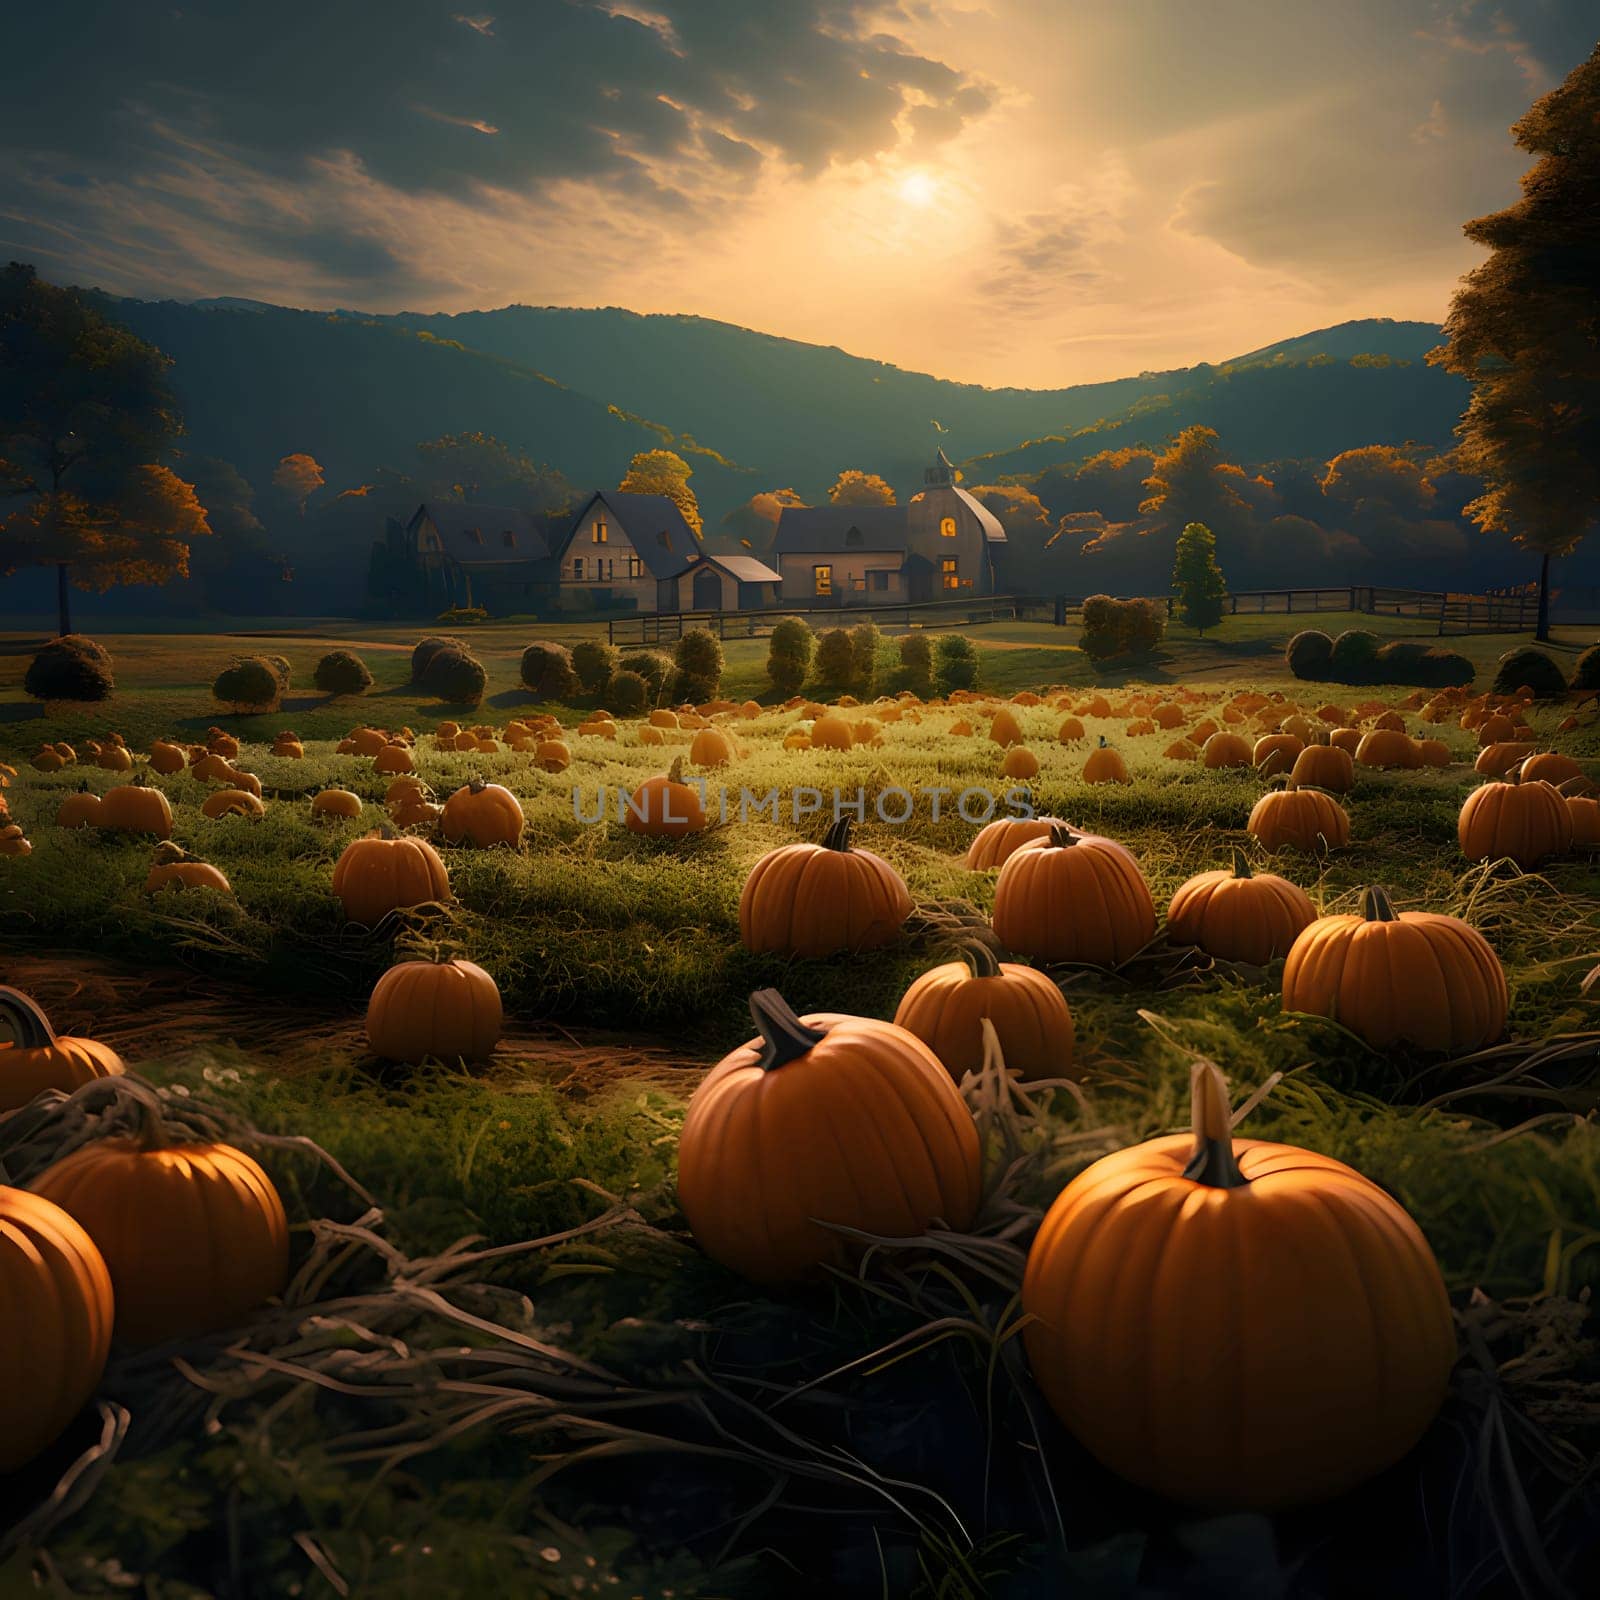 Photo of a pumpkin field at sunset or sunrise. Pumpkin as a dish of thanksgiving for the harvest. by ThemesS